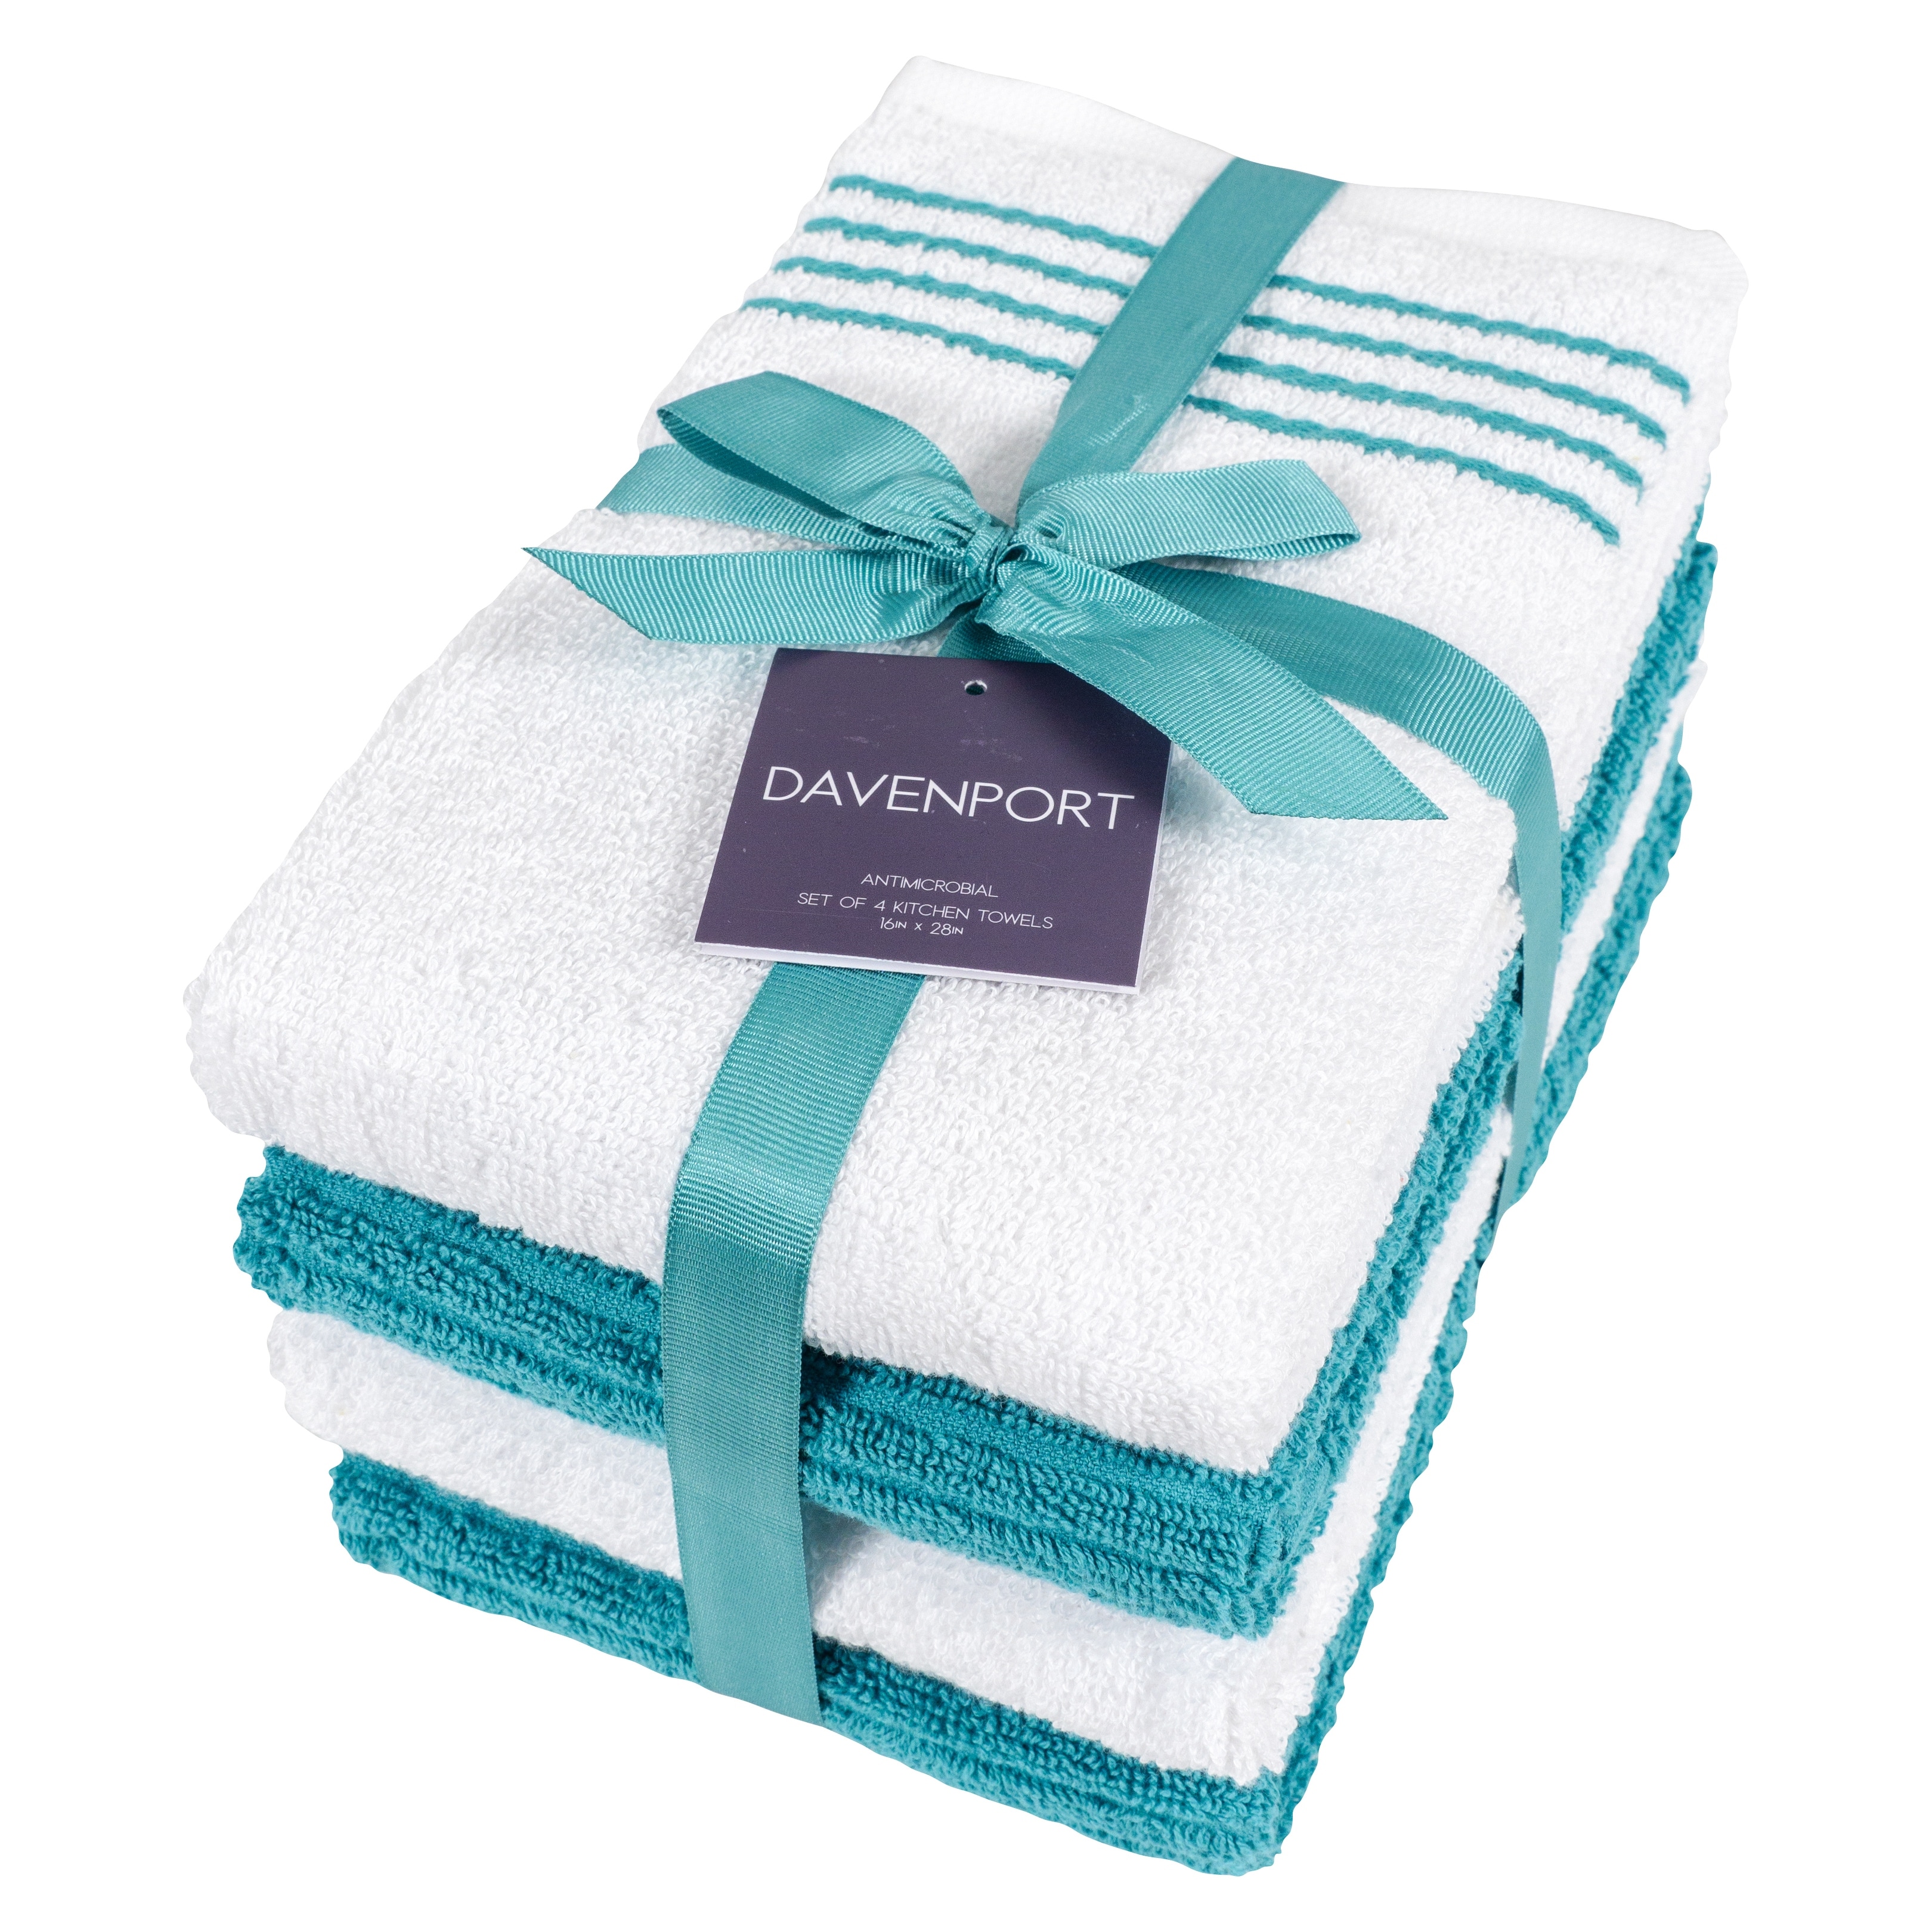 https://ak1.ostkcdn.com/images/products/is/images/direct/4c2ca9ab07a4183fb2720e755f4e1e8cf9d9b077/Davenport-Terry-Kitchen-Towels%2C-Set-of-4.jpg